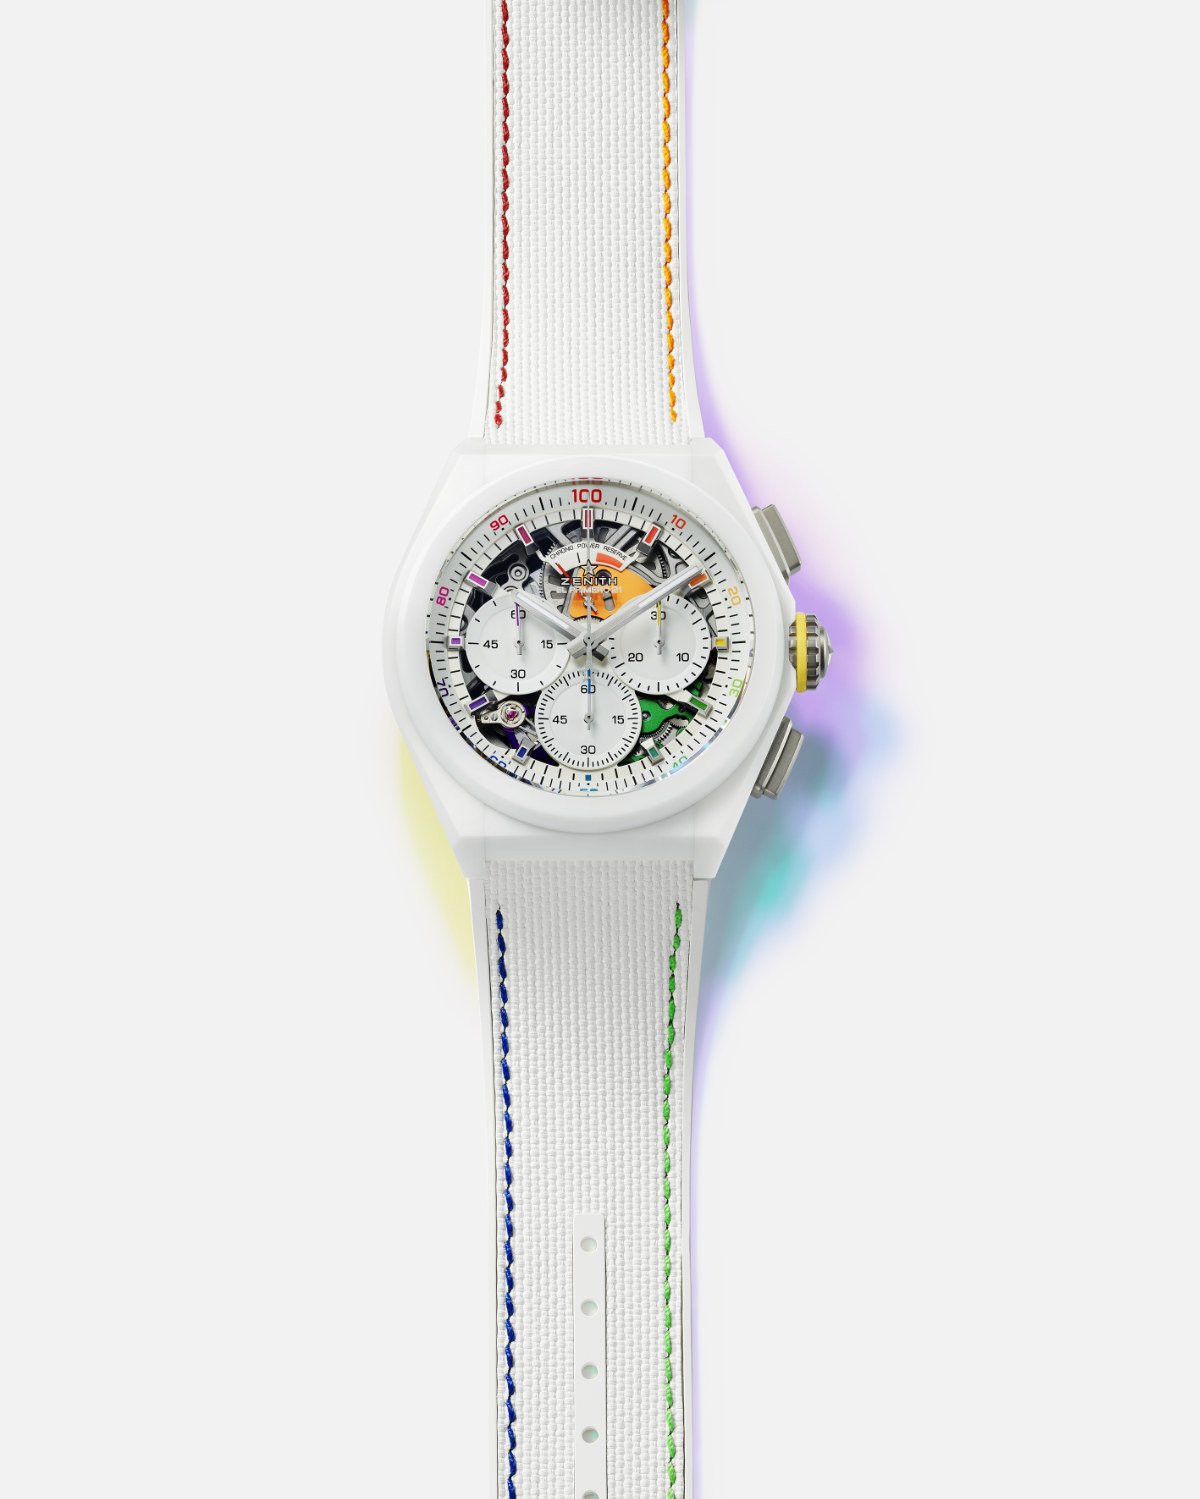 A Brightly Chromatic Expression Of The High-frequency Chronograph In The Defy 21 Chroma